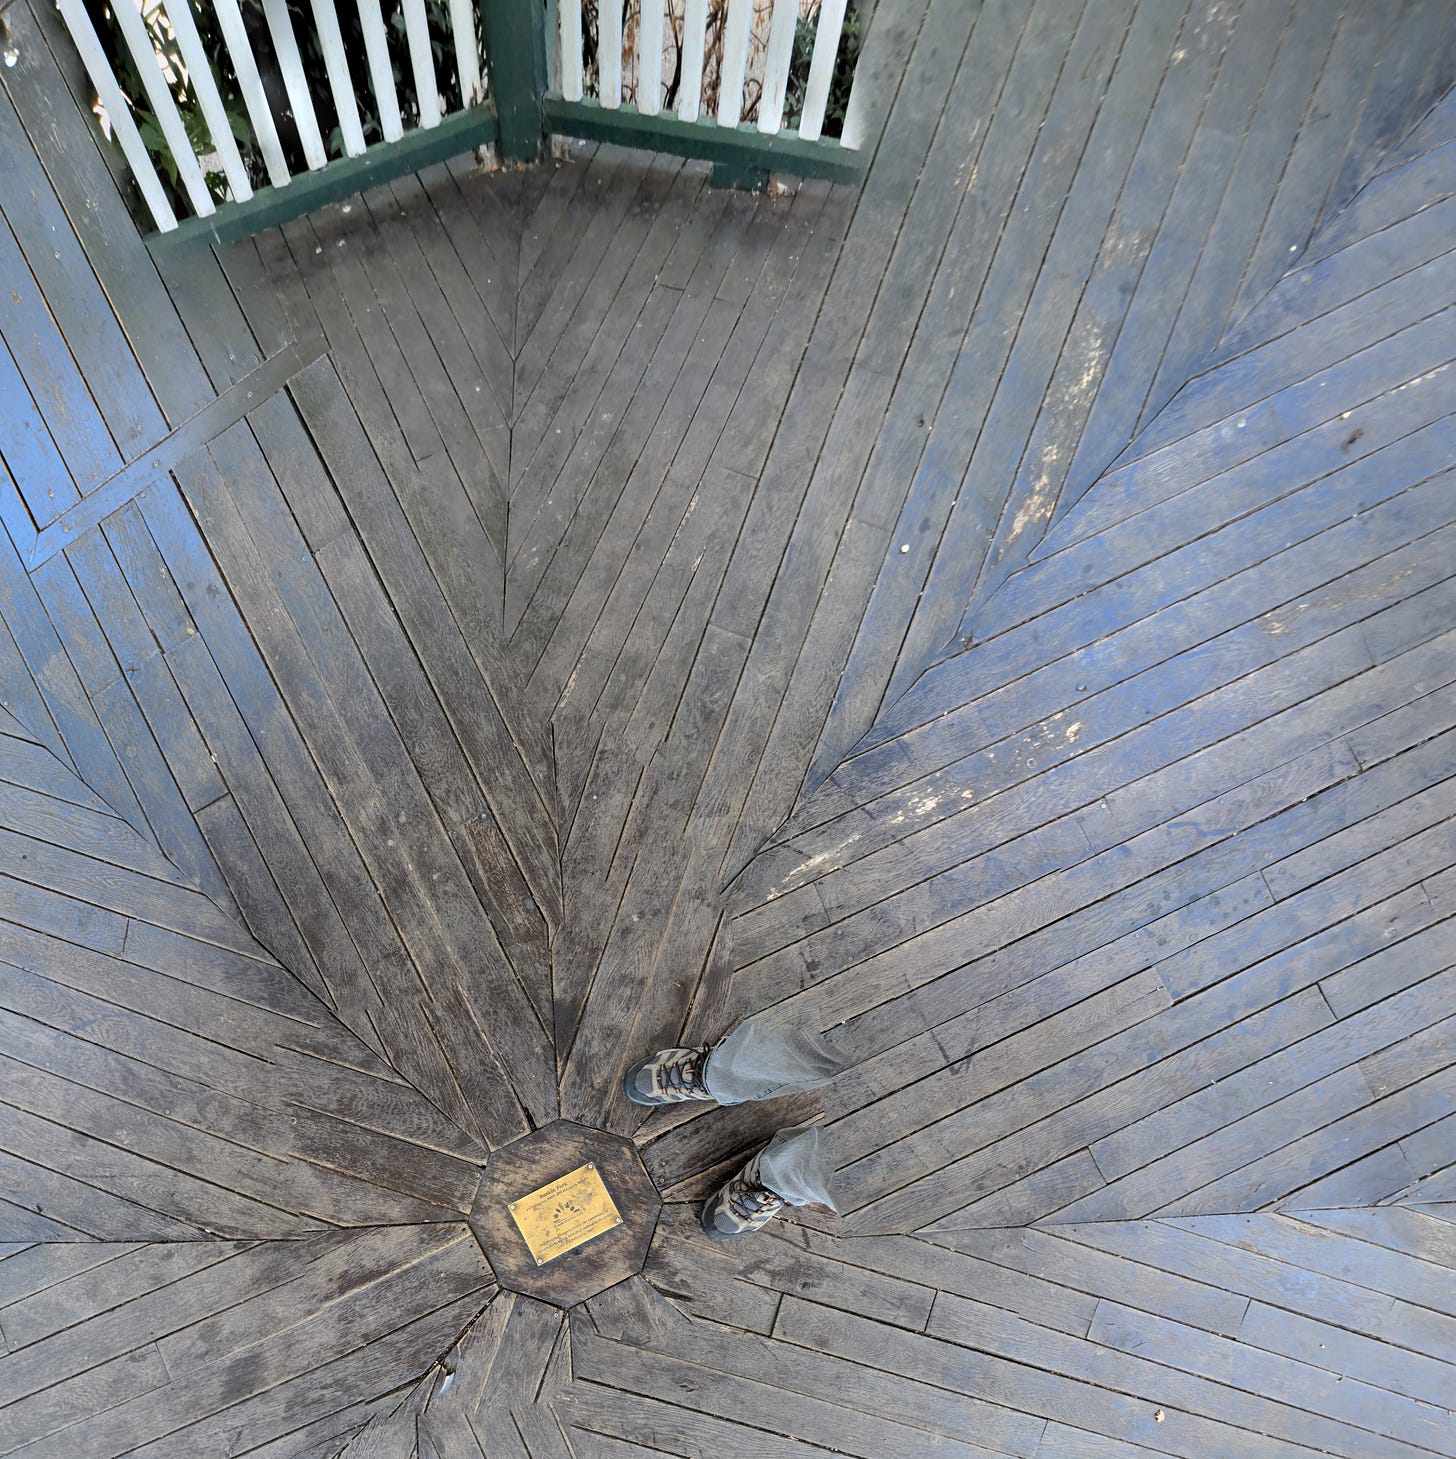 A failed photo sphere, showing the floorboards of the Ruskin Park band stand and my disembodied feet. 